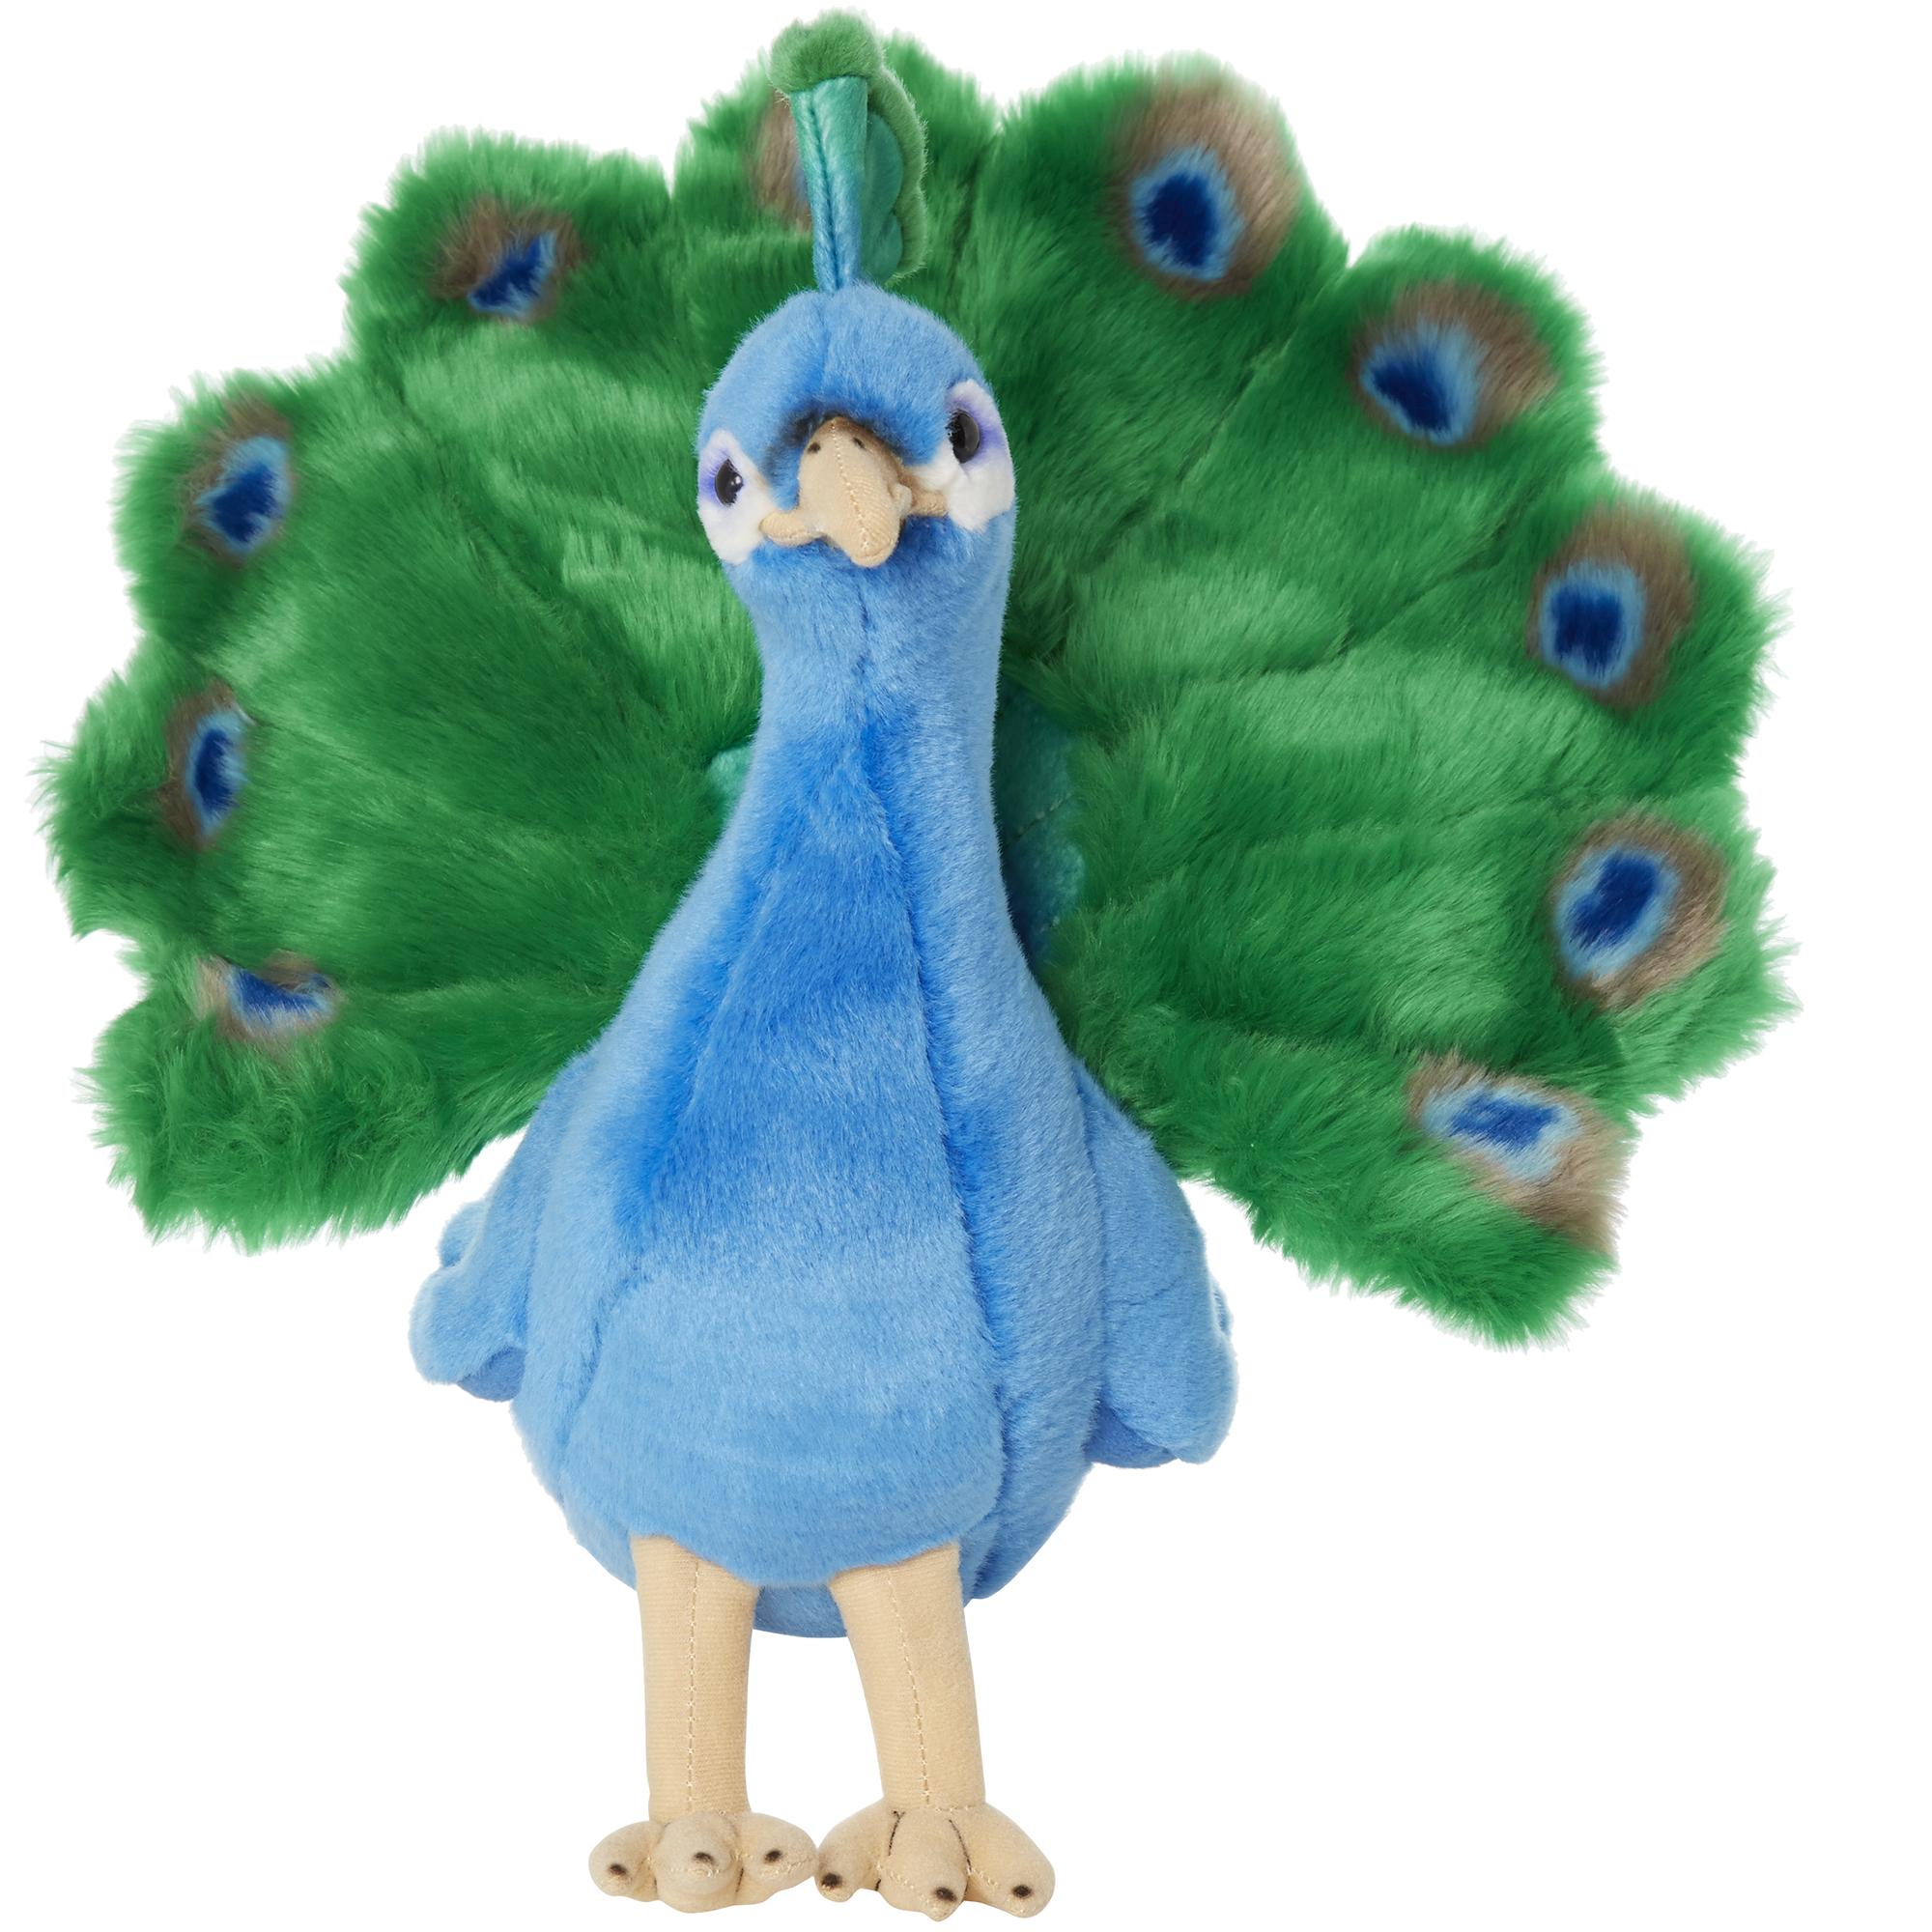 Hamleys Pearce Peacock Soft Toy - £25.00 - Hamleys for Toys and Games